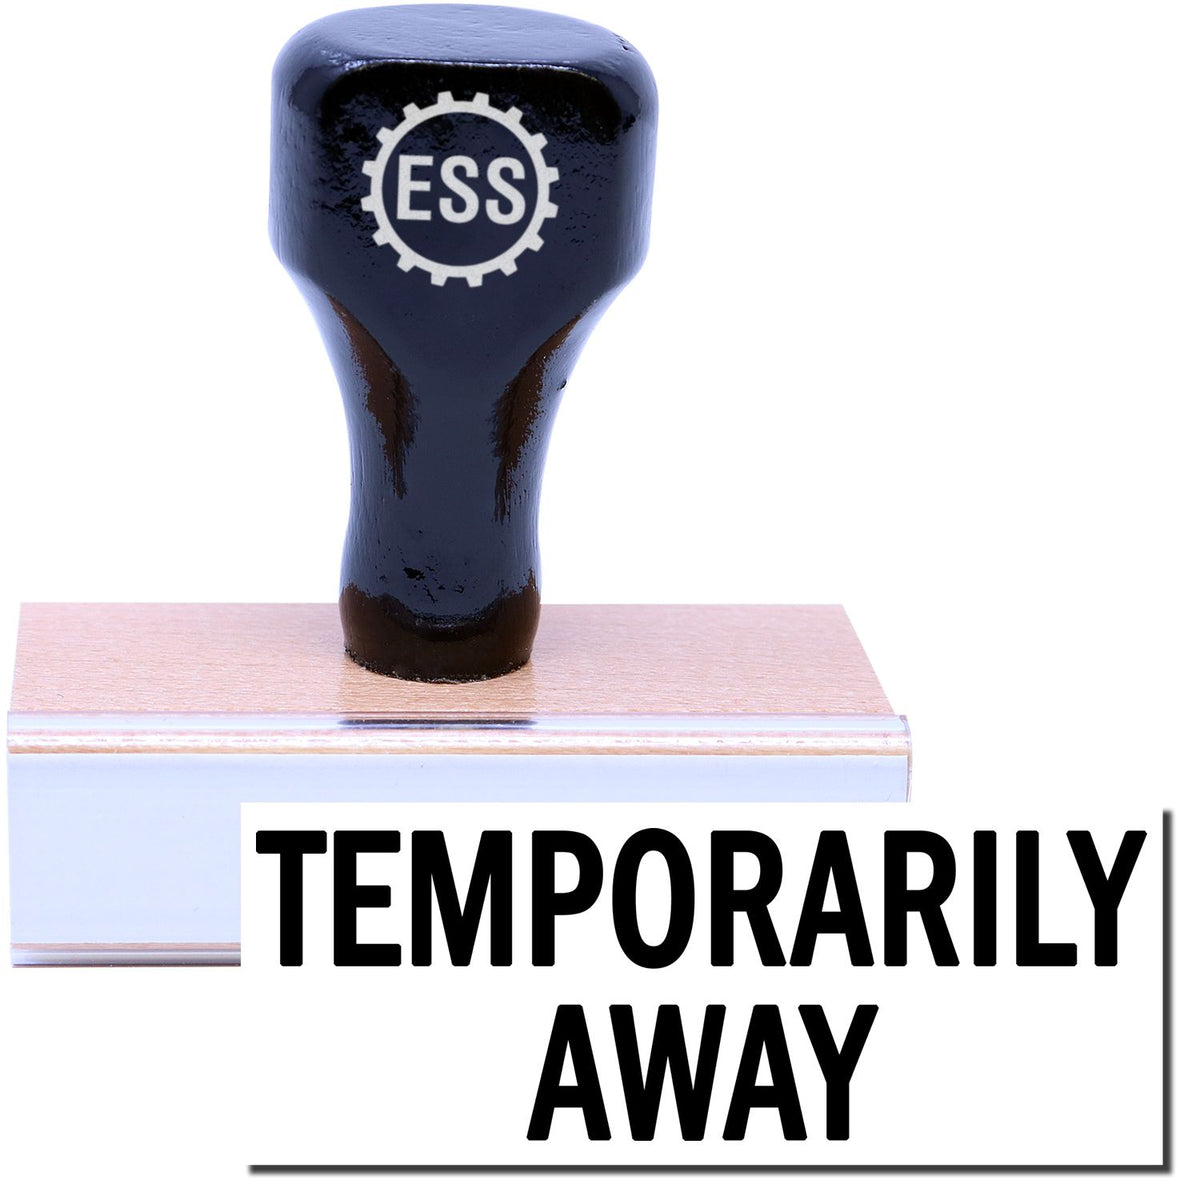 A stock office rubber stamp with a stamped image showing how the text &quot;TEMPORARILY AWAY&quot; in a large font is displayed after stamping.